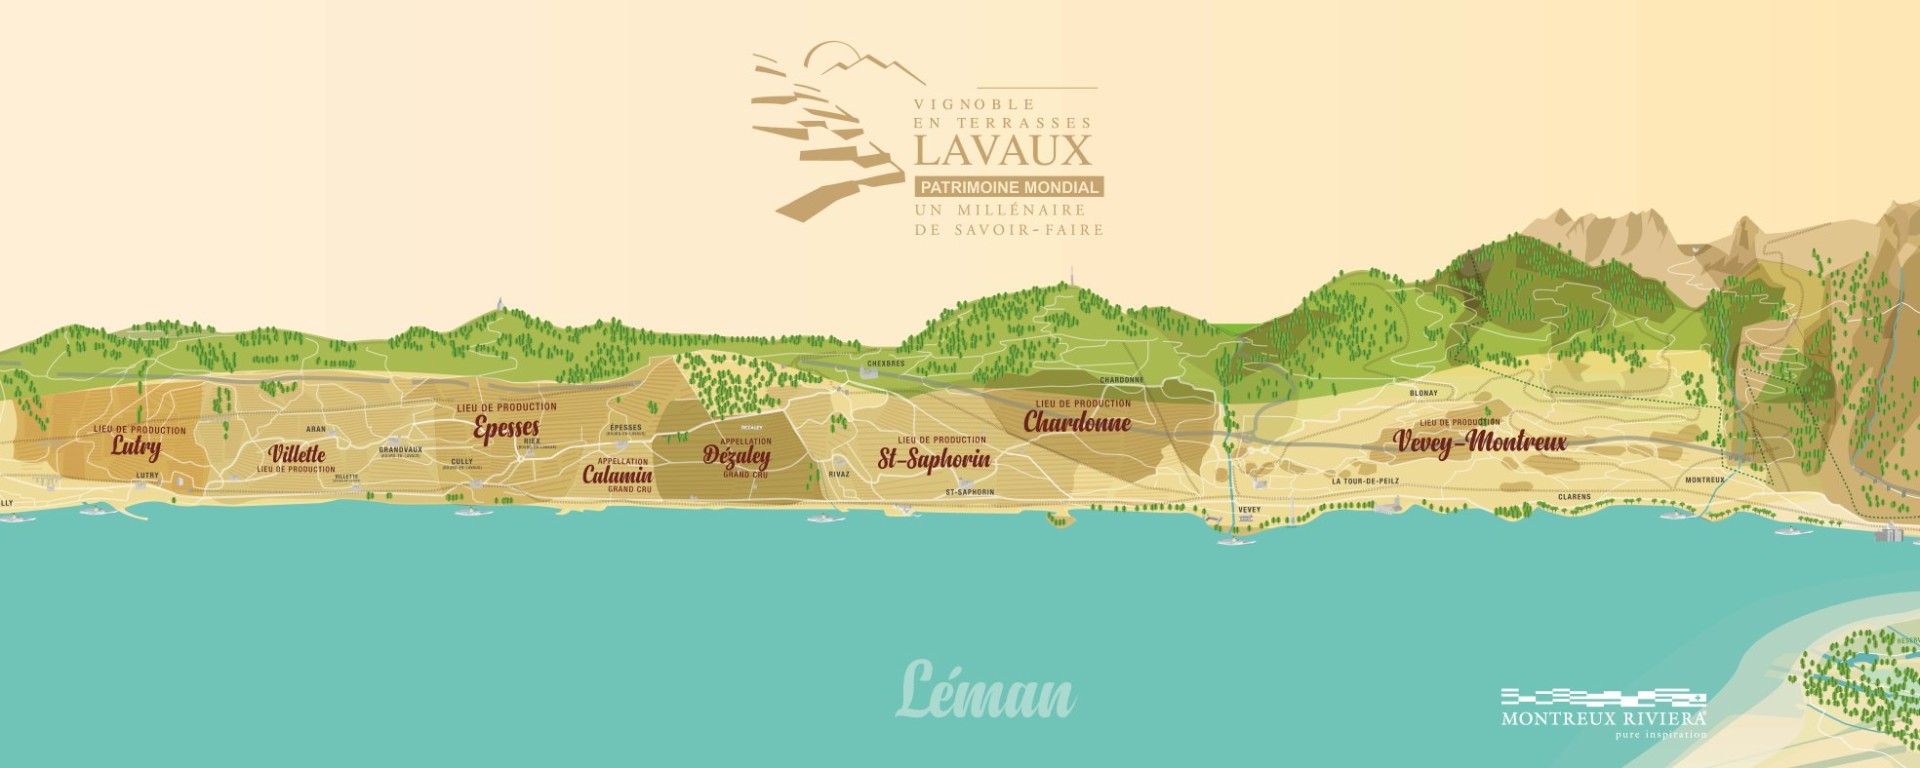 Lavaux Appellations Terroirs